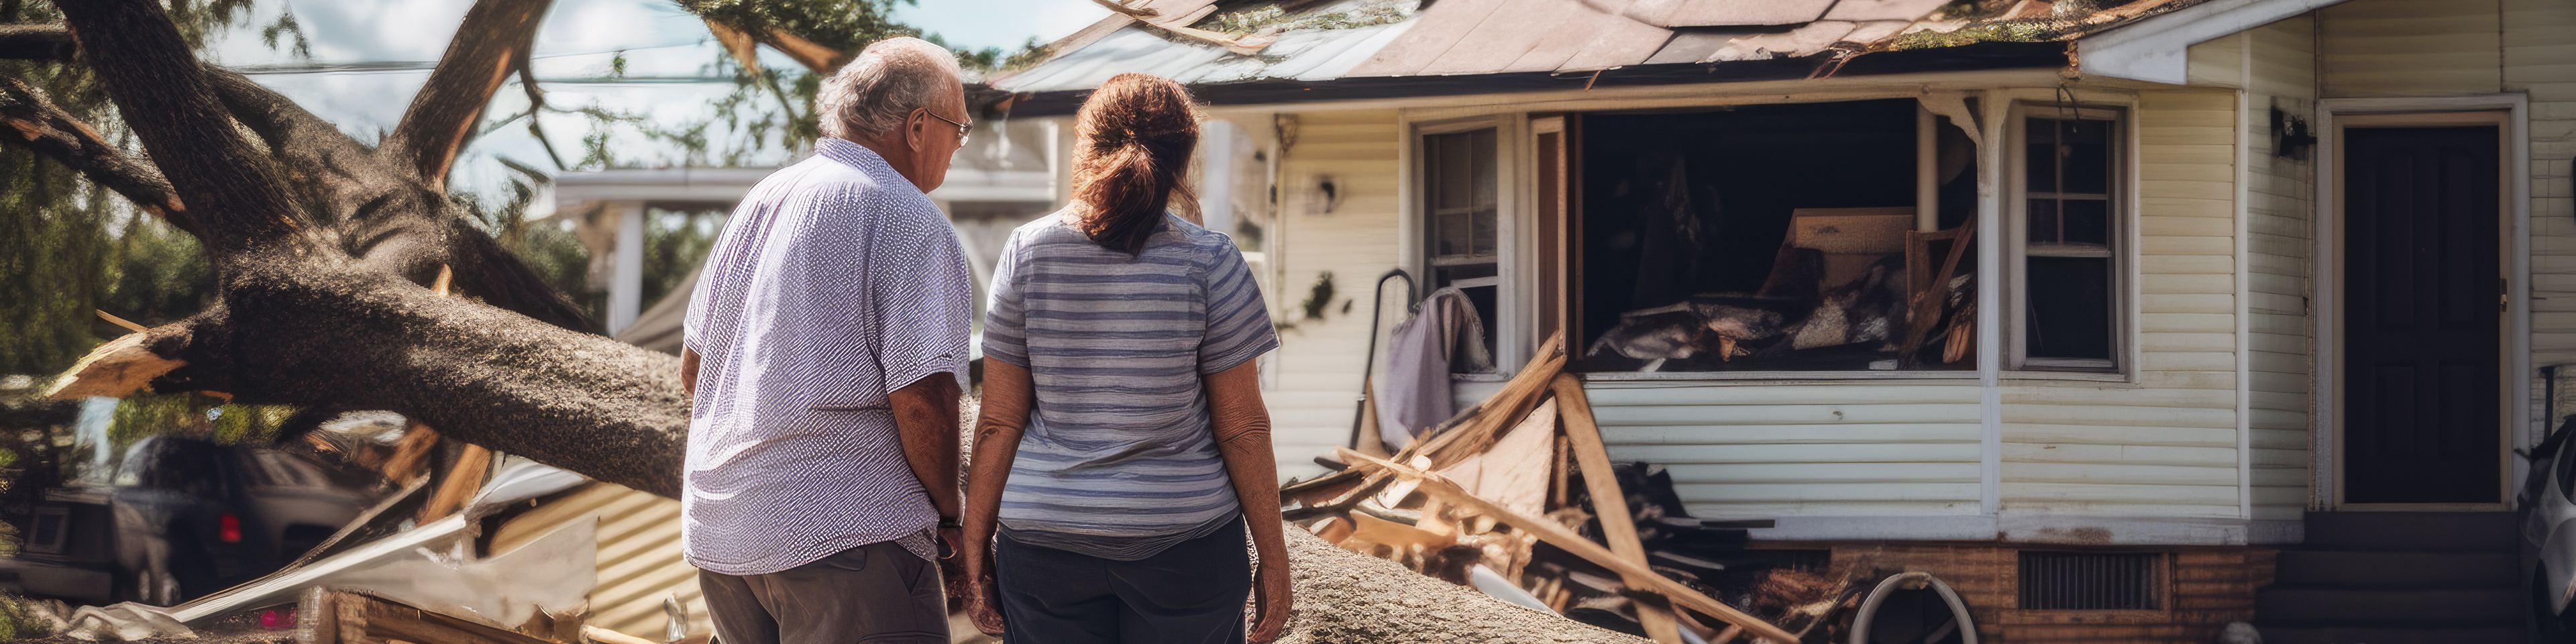 Tax relief for victims of Arkansas severe storms, straight-line winds, tornadoes, and flooding: IRA and HSA deadlines postponed